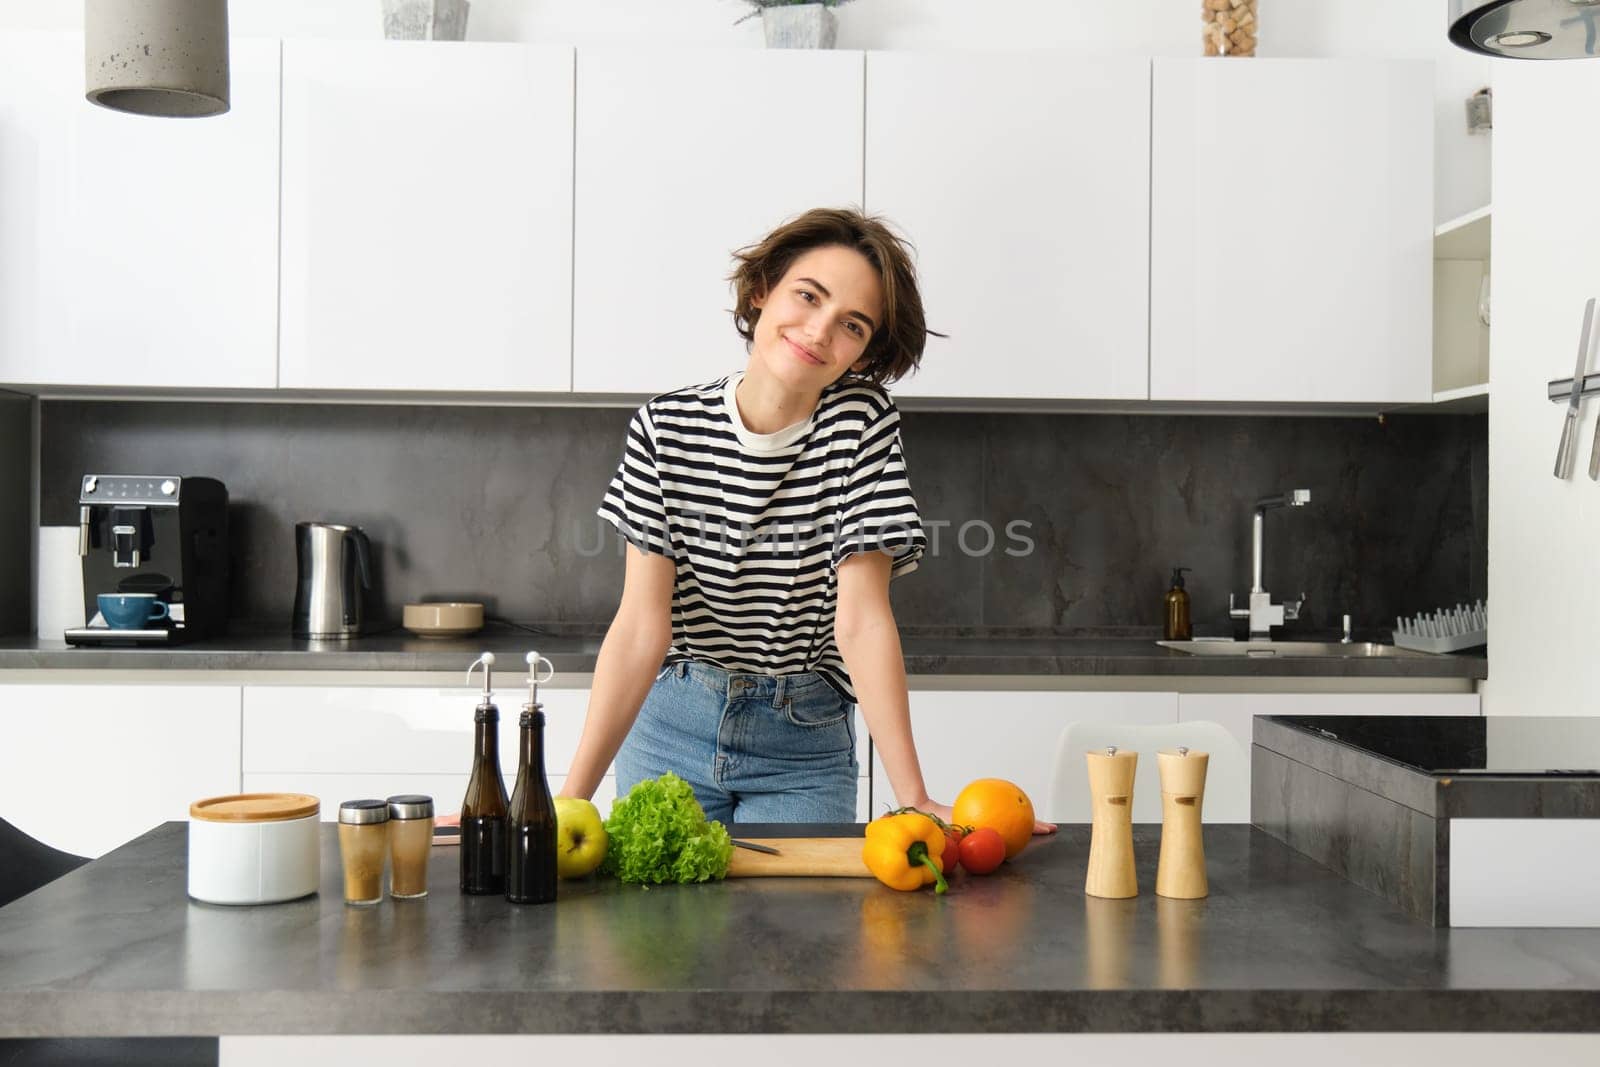 Portrait of young woman cooking salad. Cute girl vegan chopping vegetables on kitchen counter, preparing food.